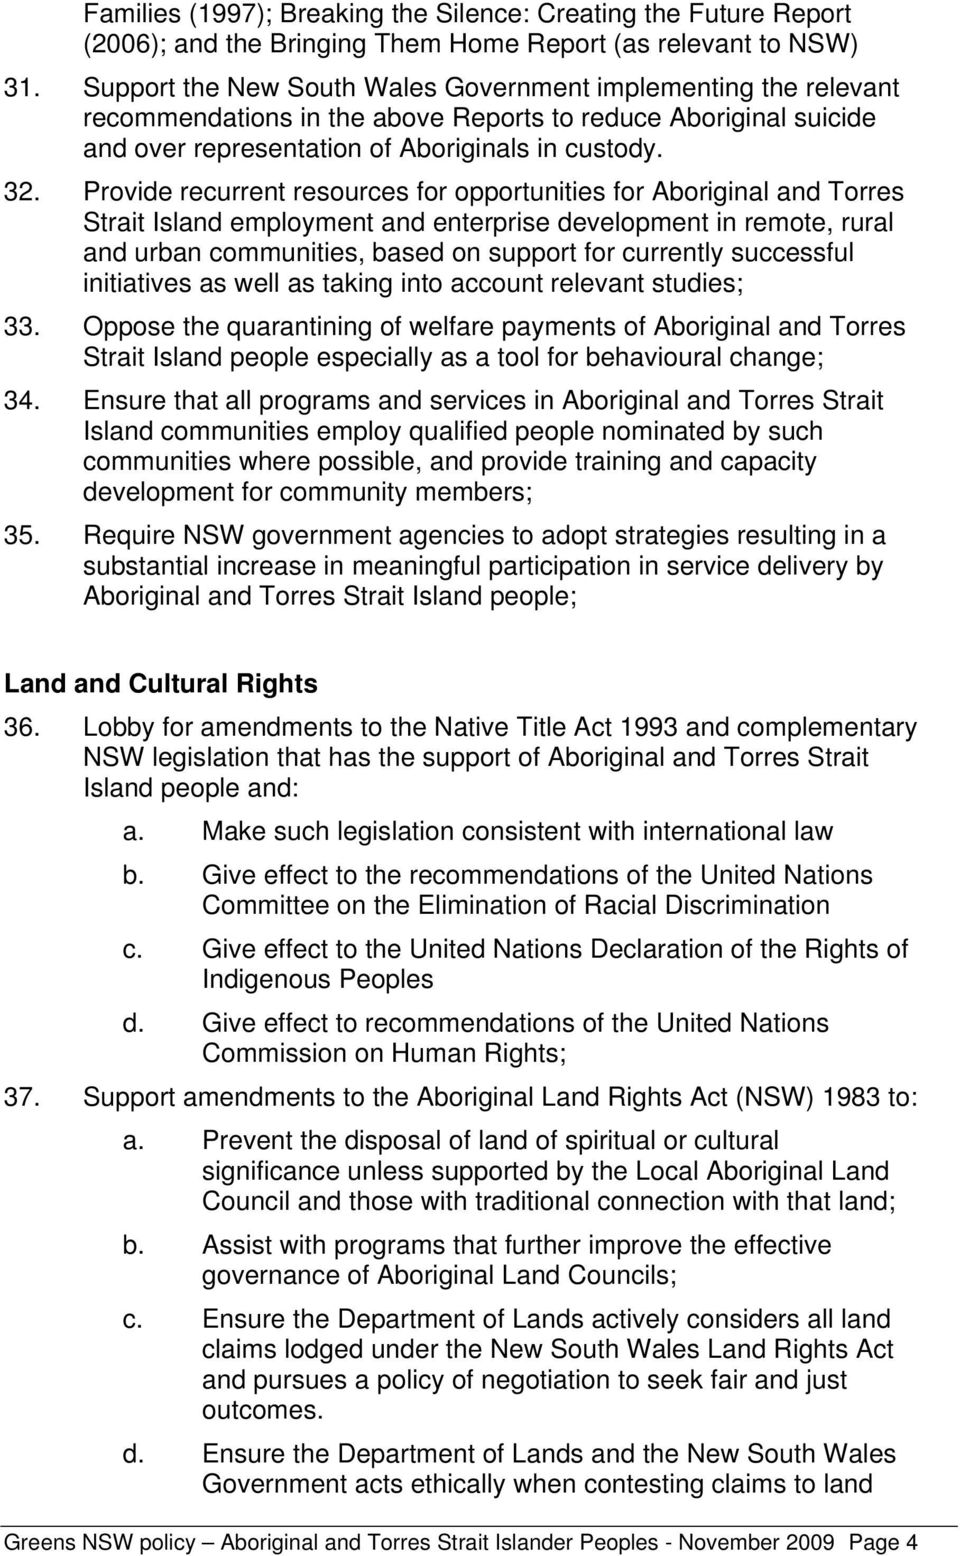 Provide recurrent resources for opportunities for Aboriginal and Torres Strait Island employment and enterprise development in remote, rural and urban communities, based on support for currently